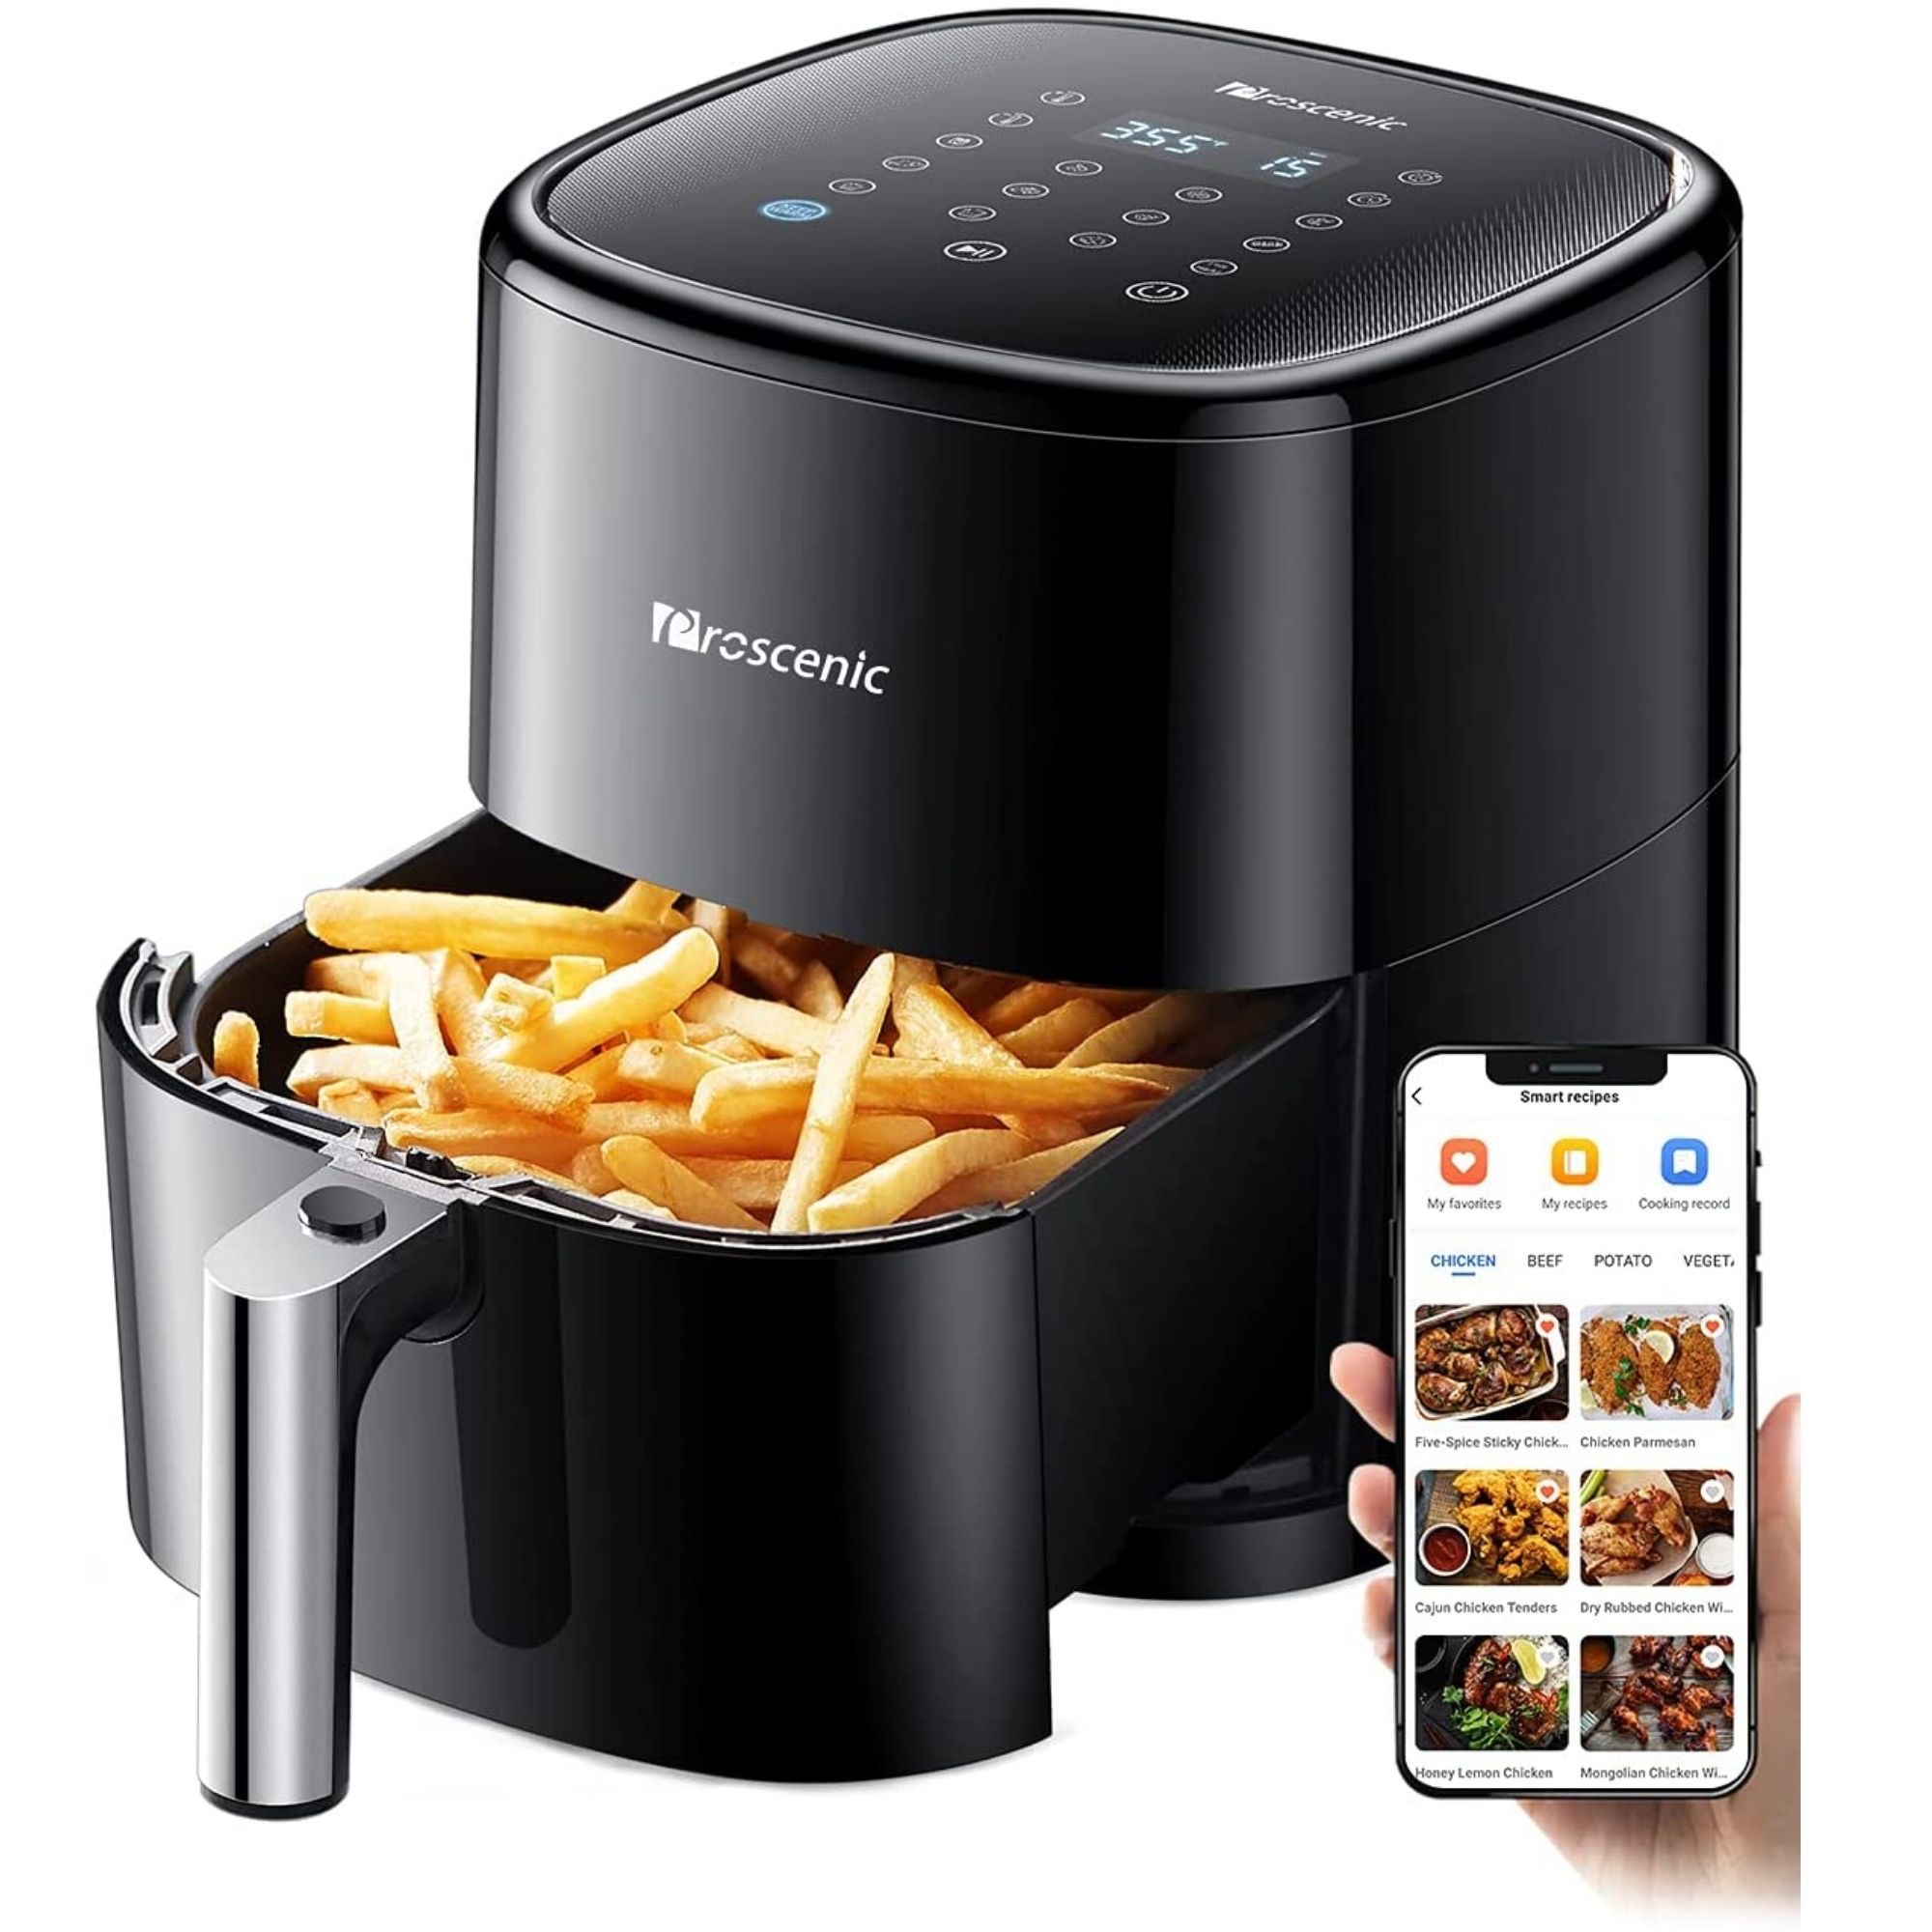 Proscenic T21 smart air fryer review